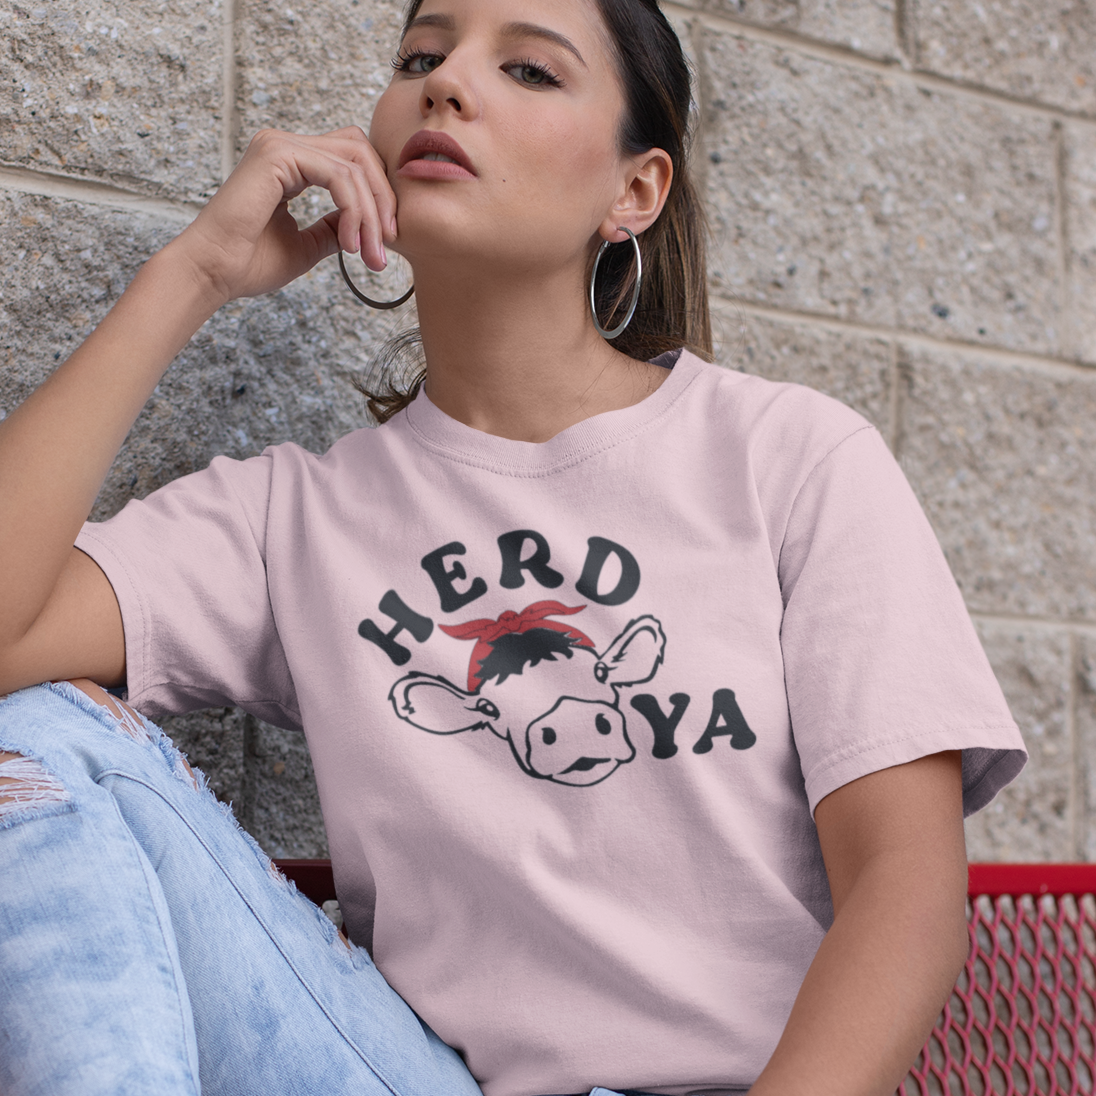 herd-ya-pink-t-shirt-cowgirl-mockup-of-a-trendy-woman-wearing-a-unisex-tee-and-distressed-jeans